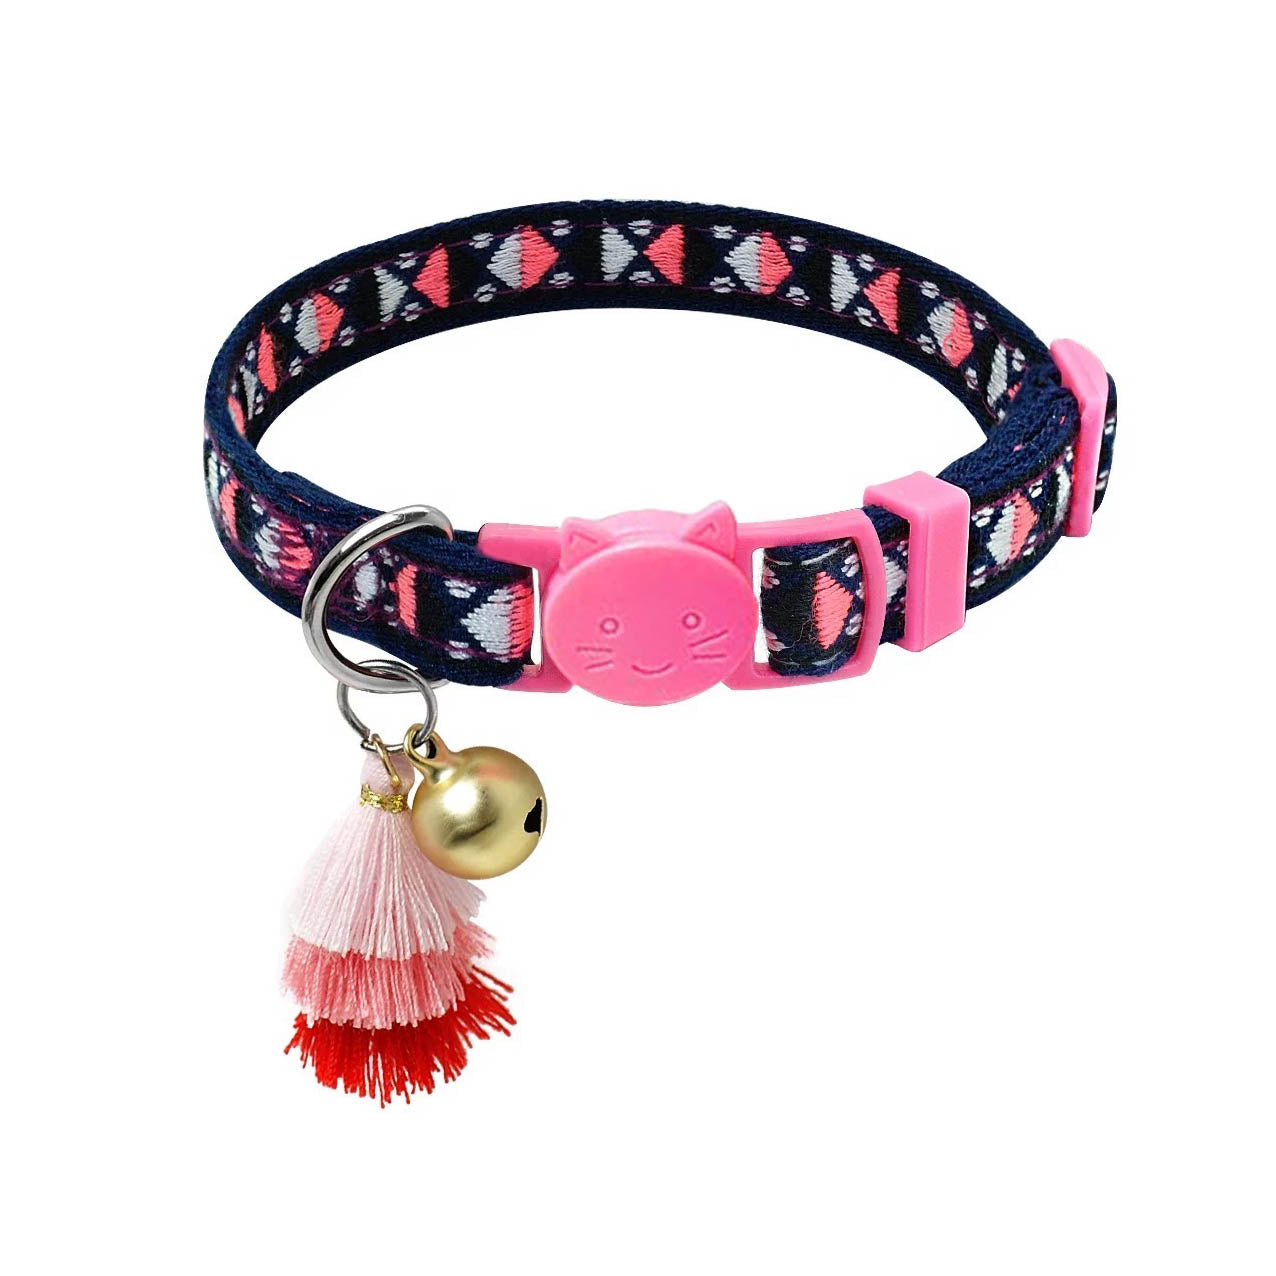 Adjustable Collar with Bell - Navy Pink Aztec